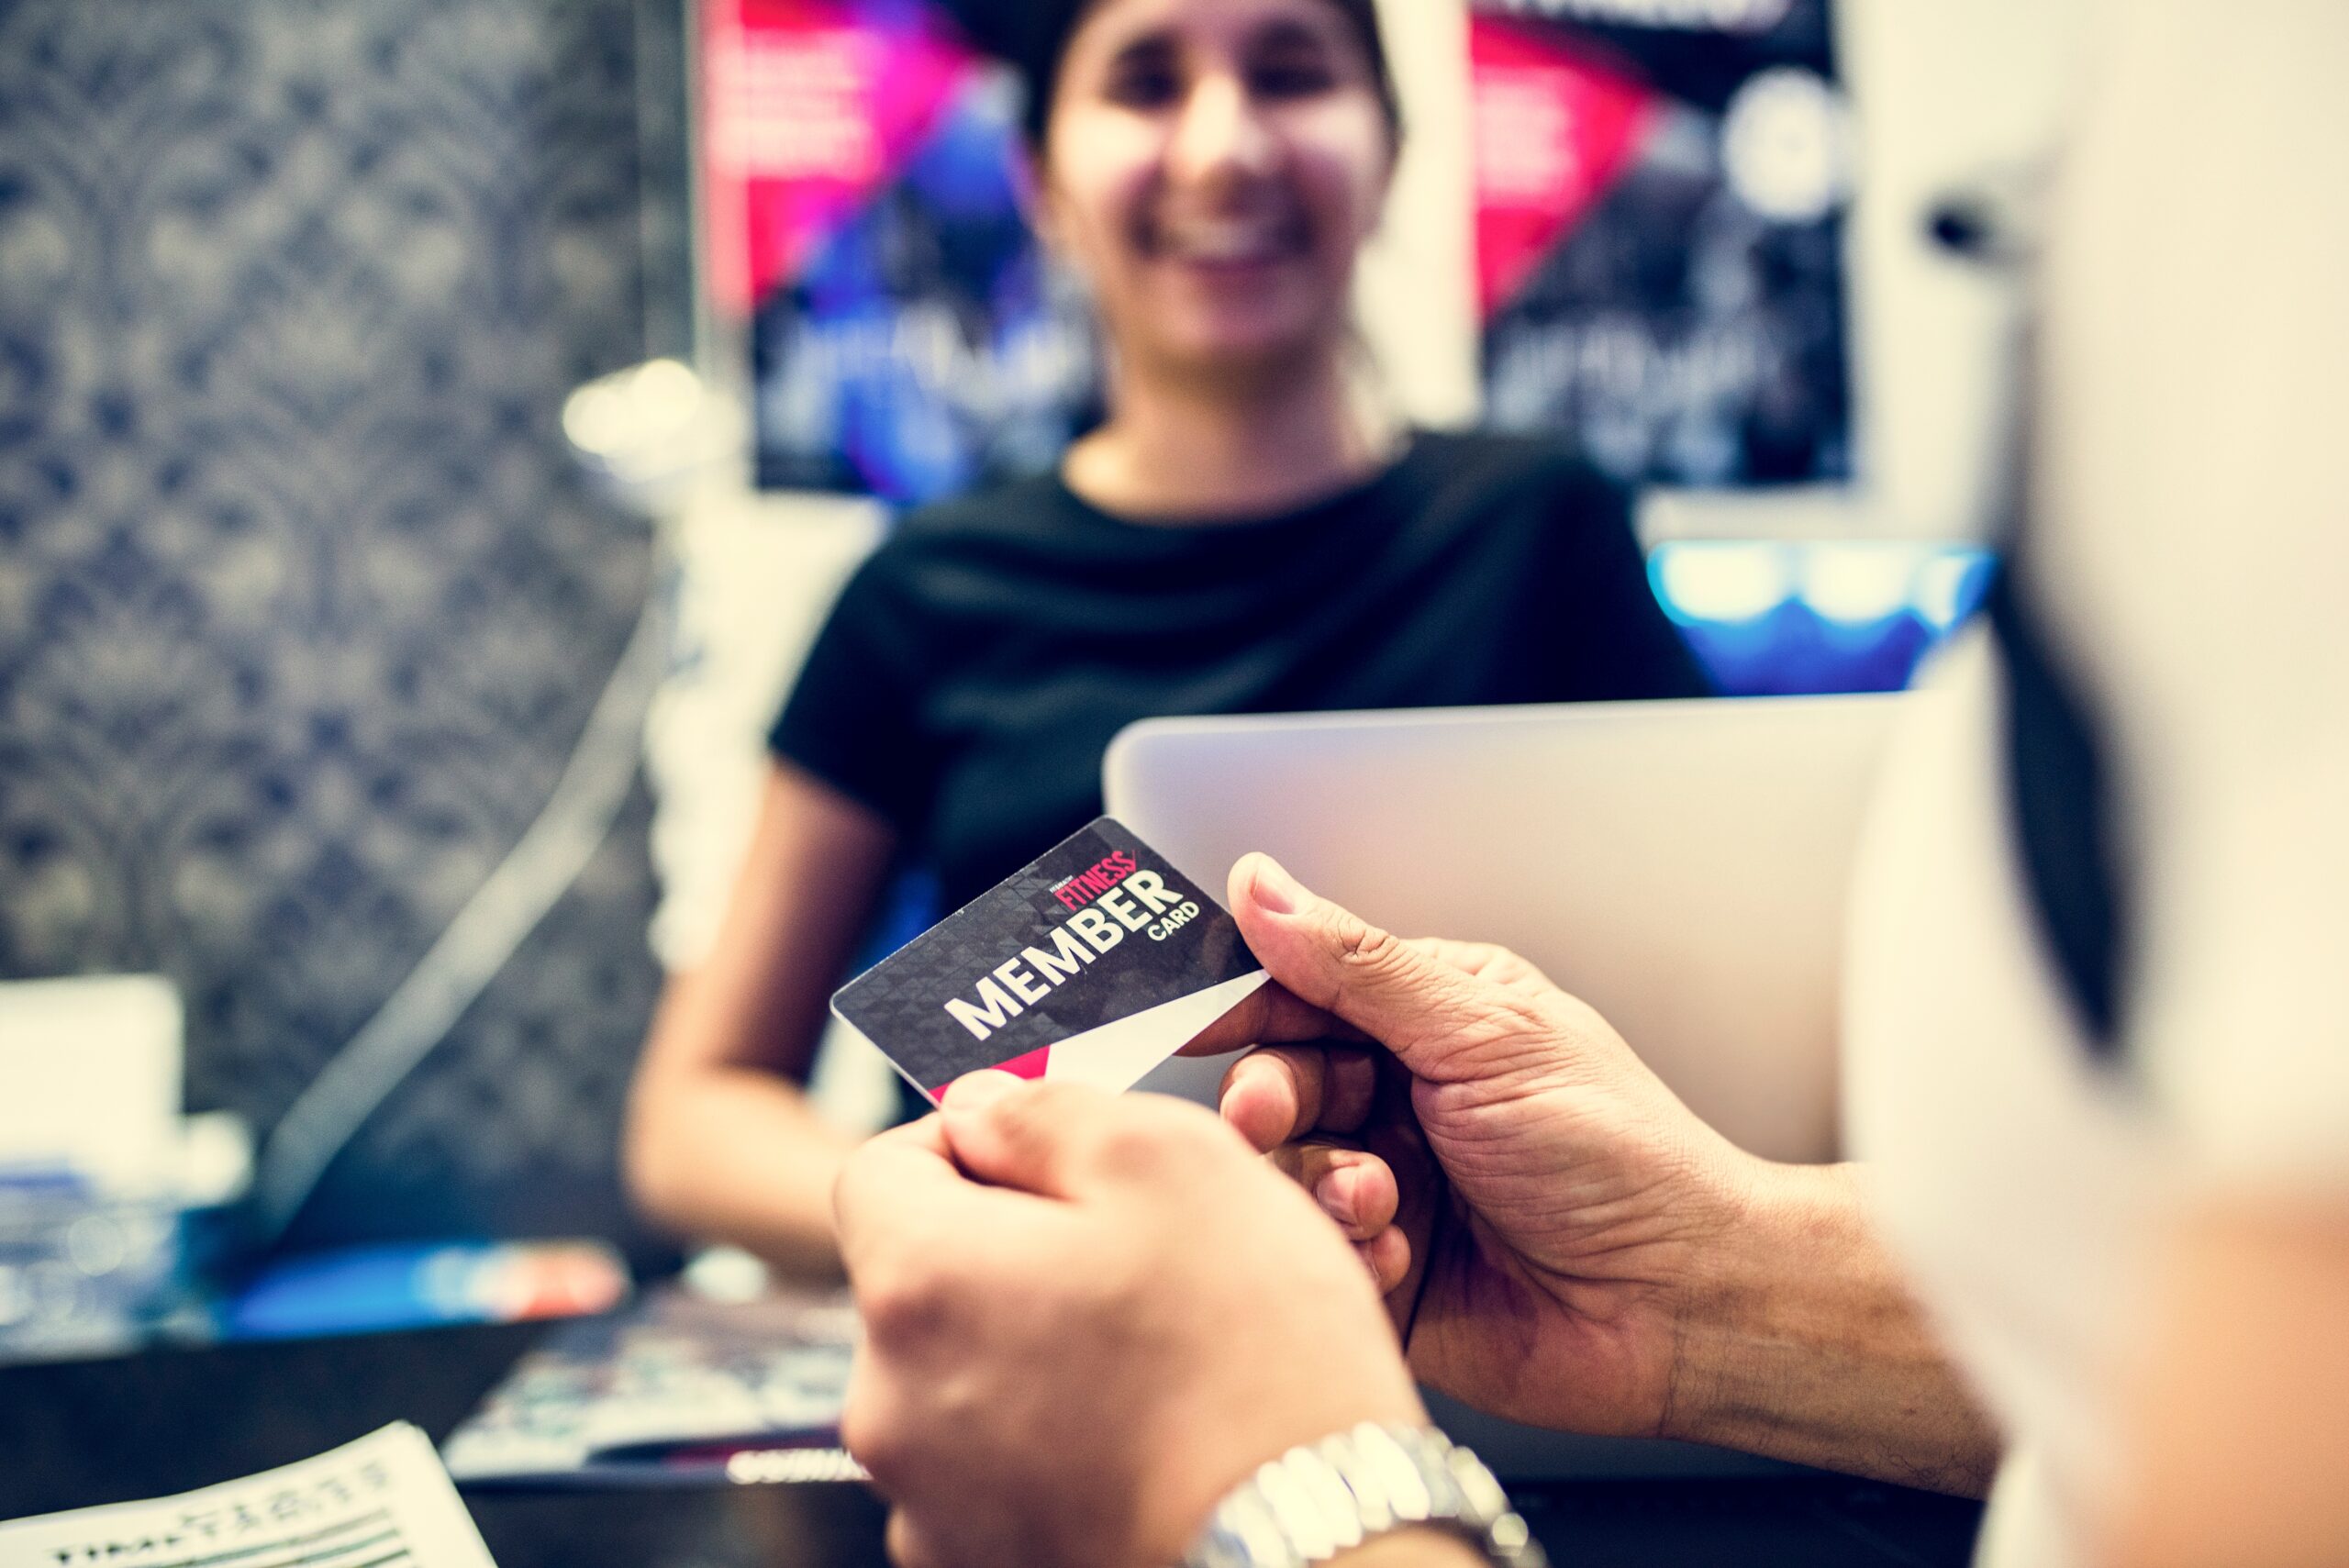 membership card being handed off to woman at computer